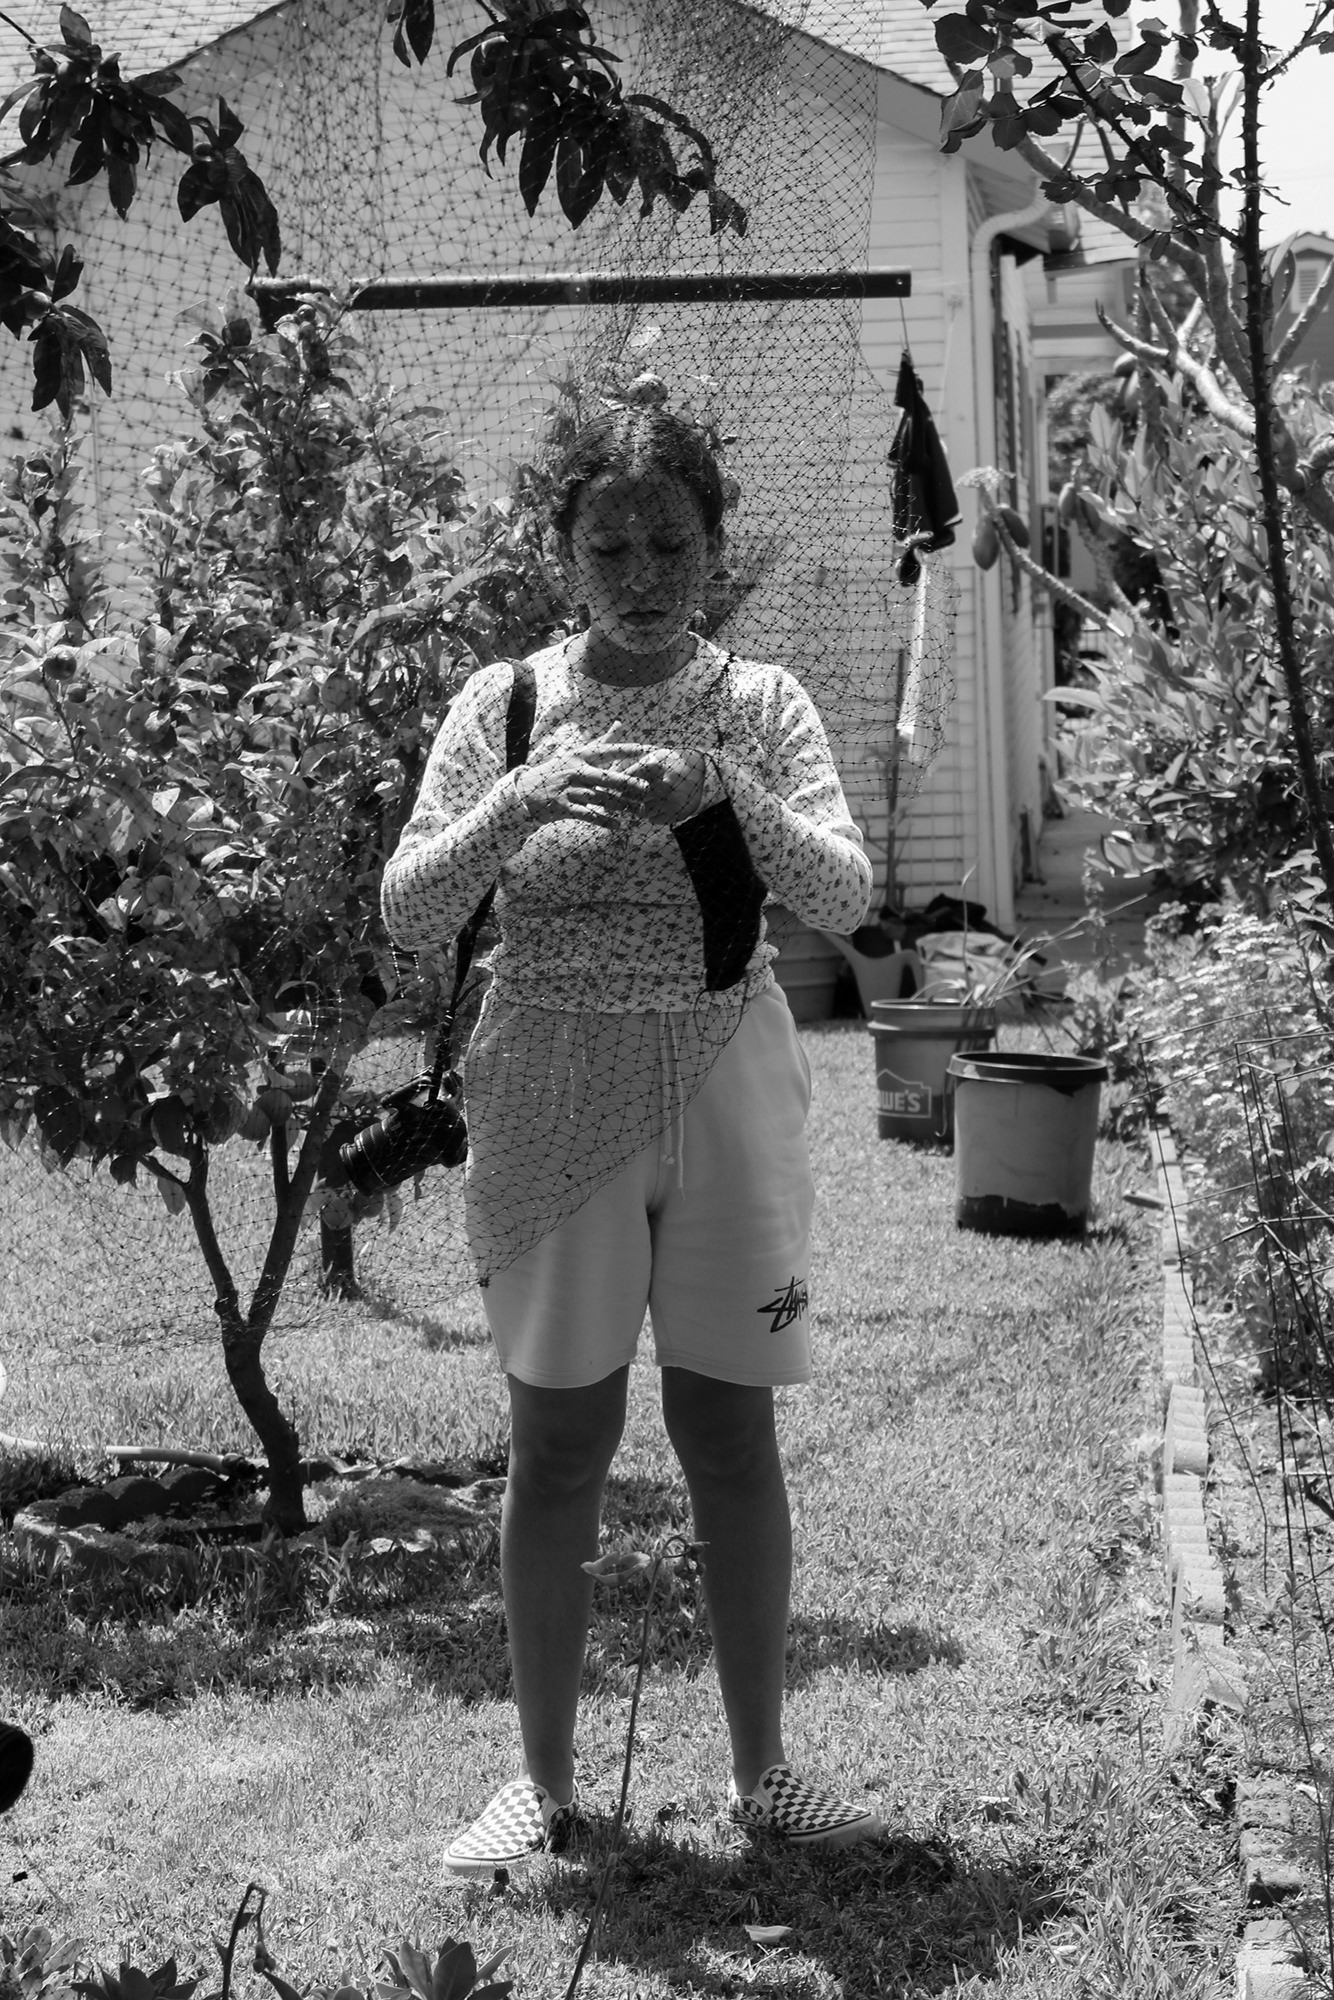 Image description: a black-and-white photograph of the artist’s older sister looking down at her hands in a backyard behind a net. Photo by Ixchel Cruz, 15.